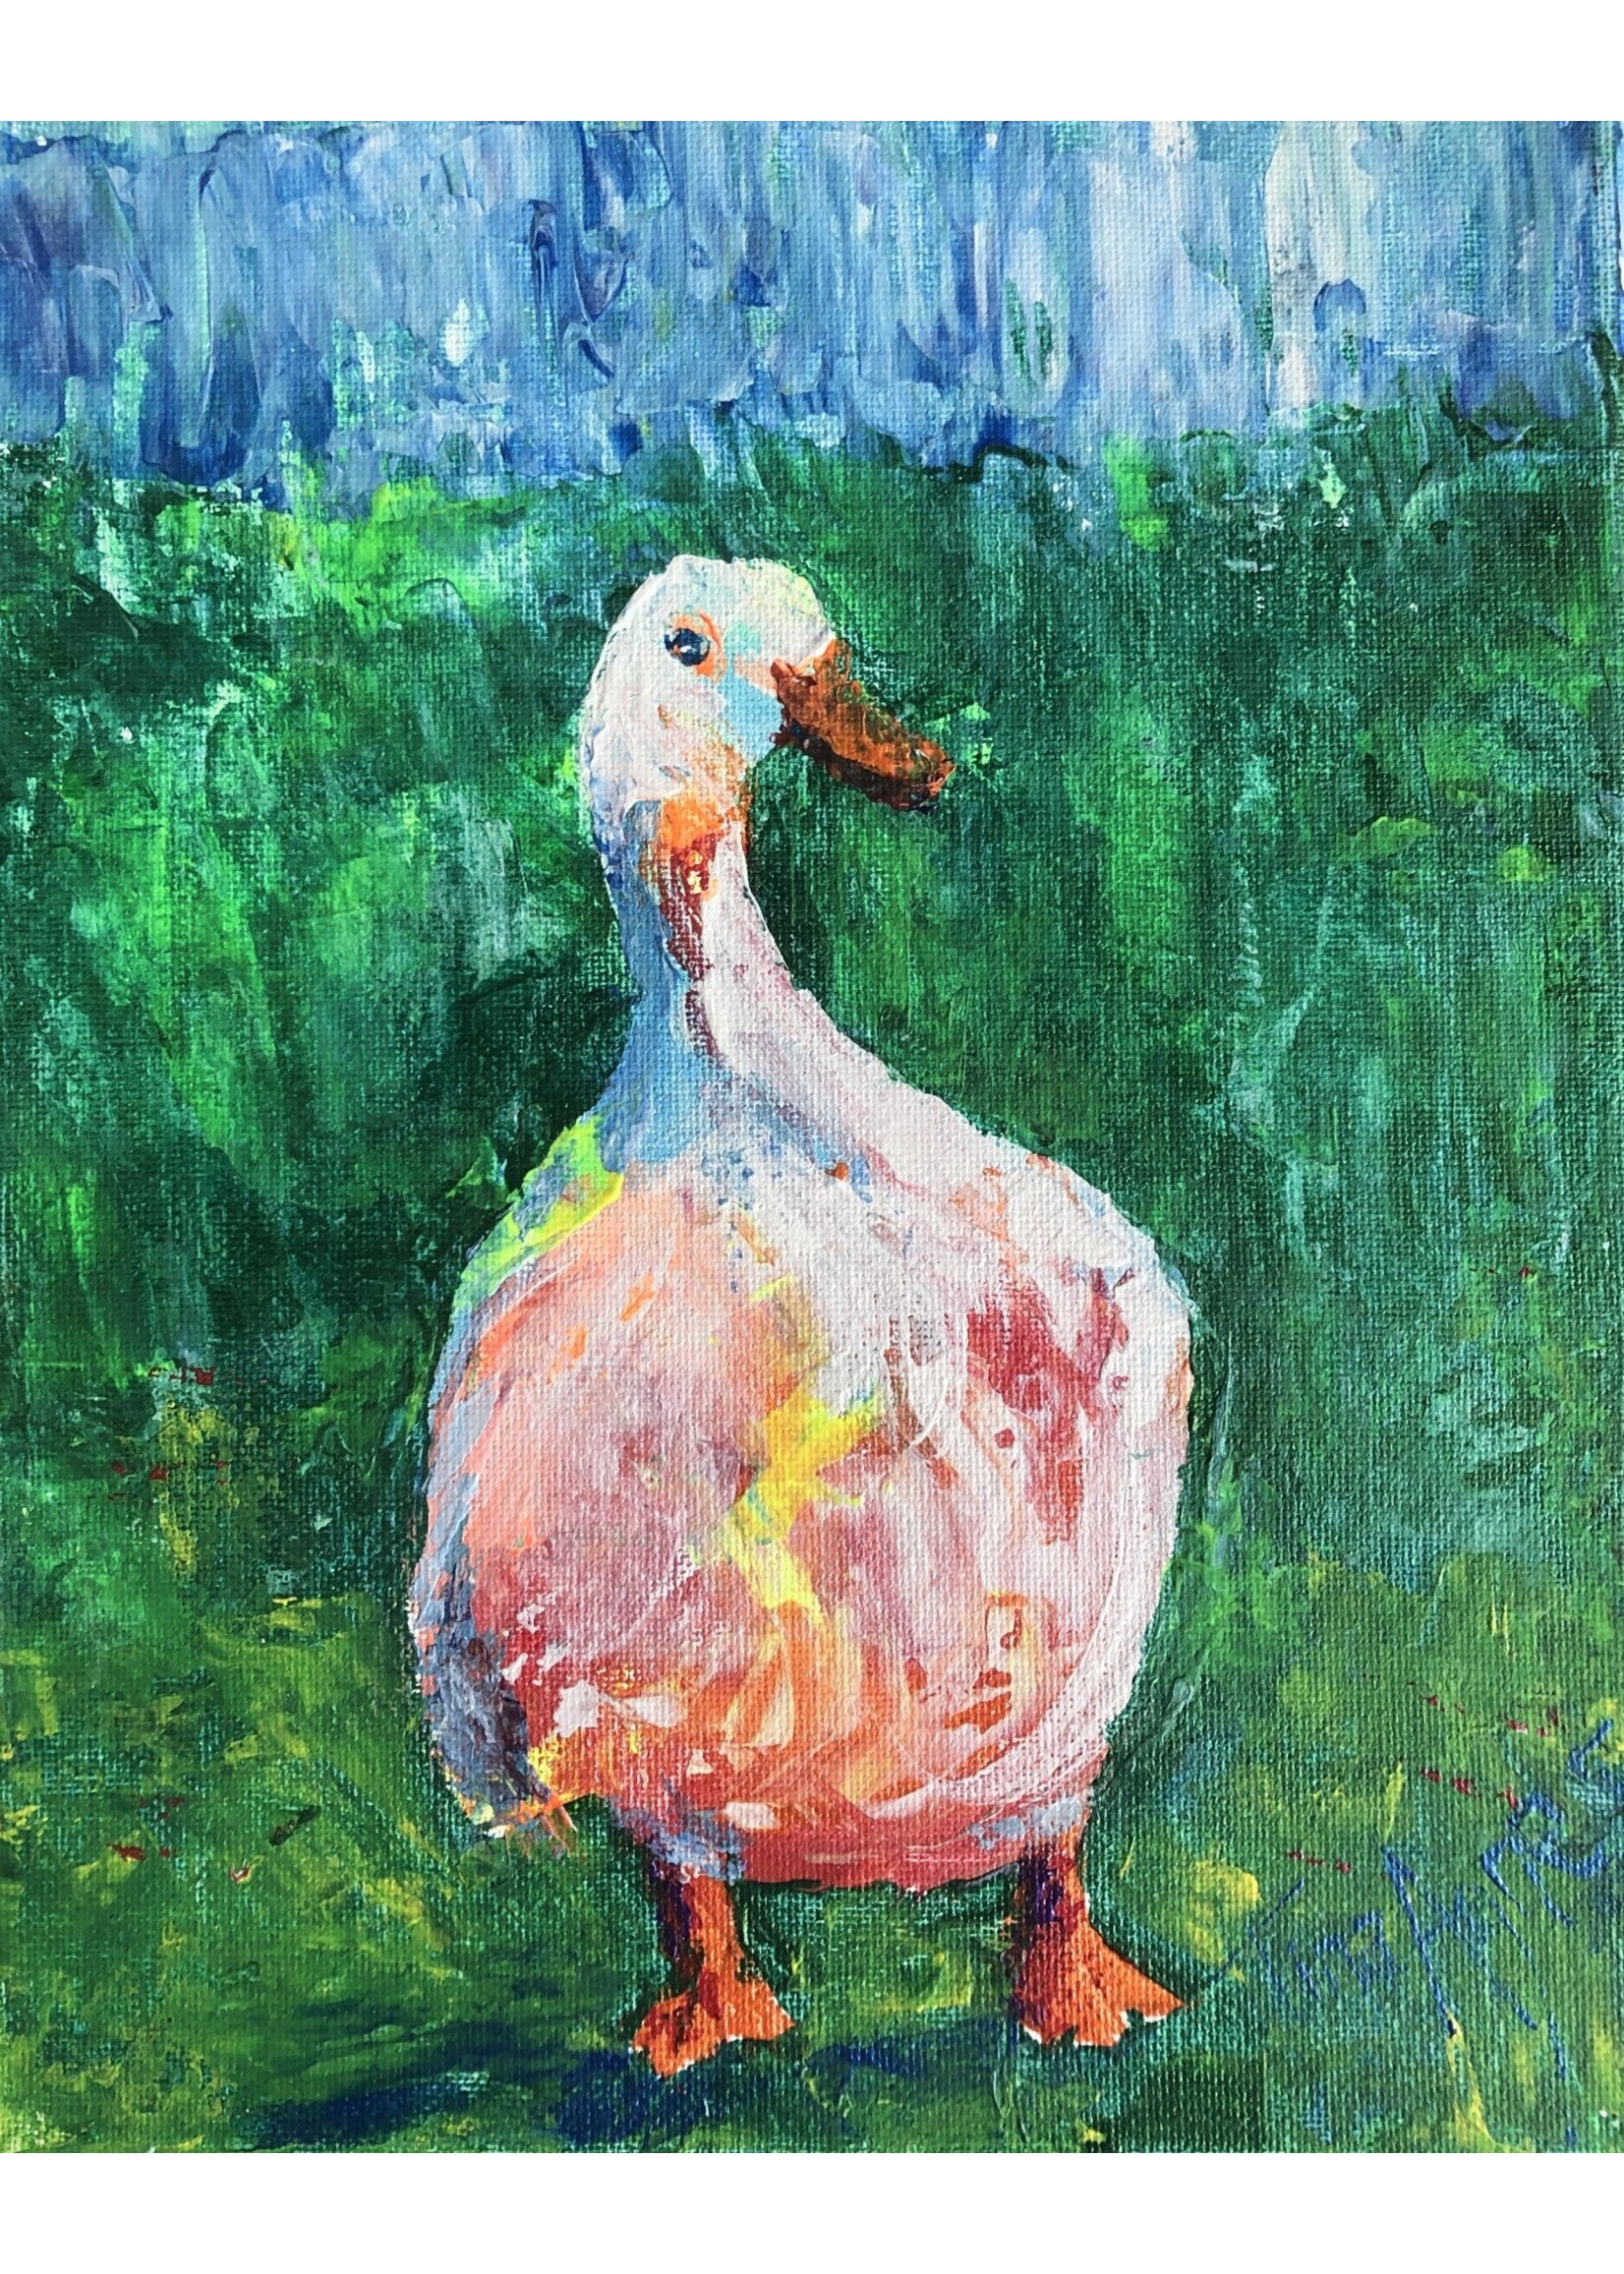 Goose acrylic - 8x10 - Tangled Up In Hue